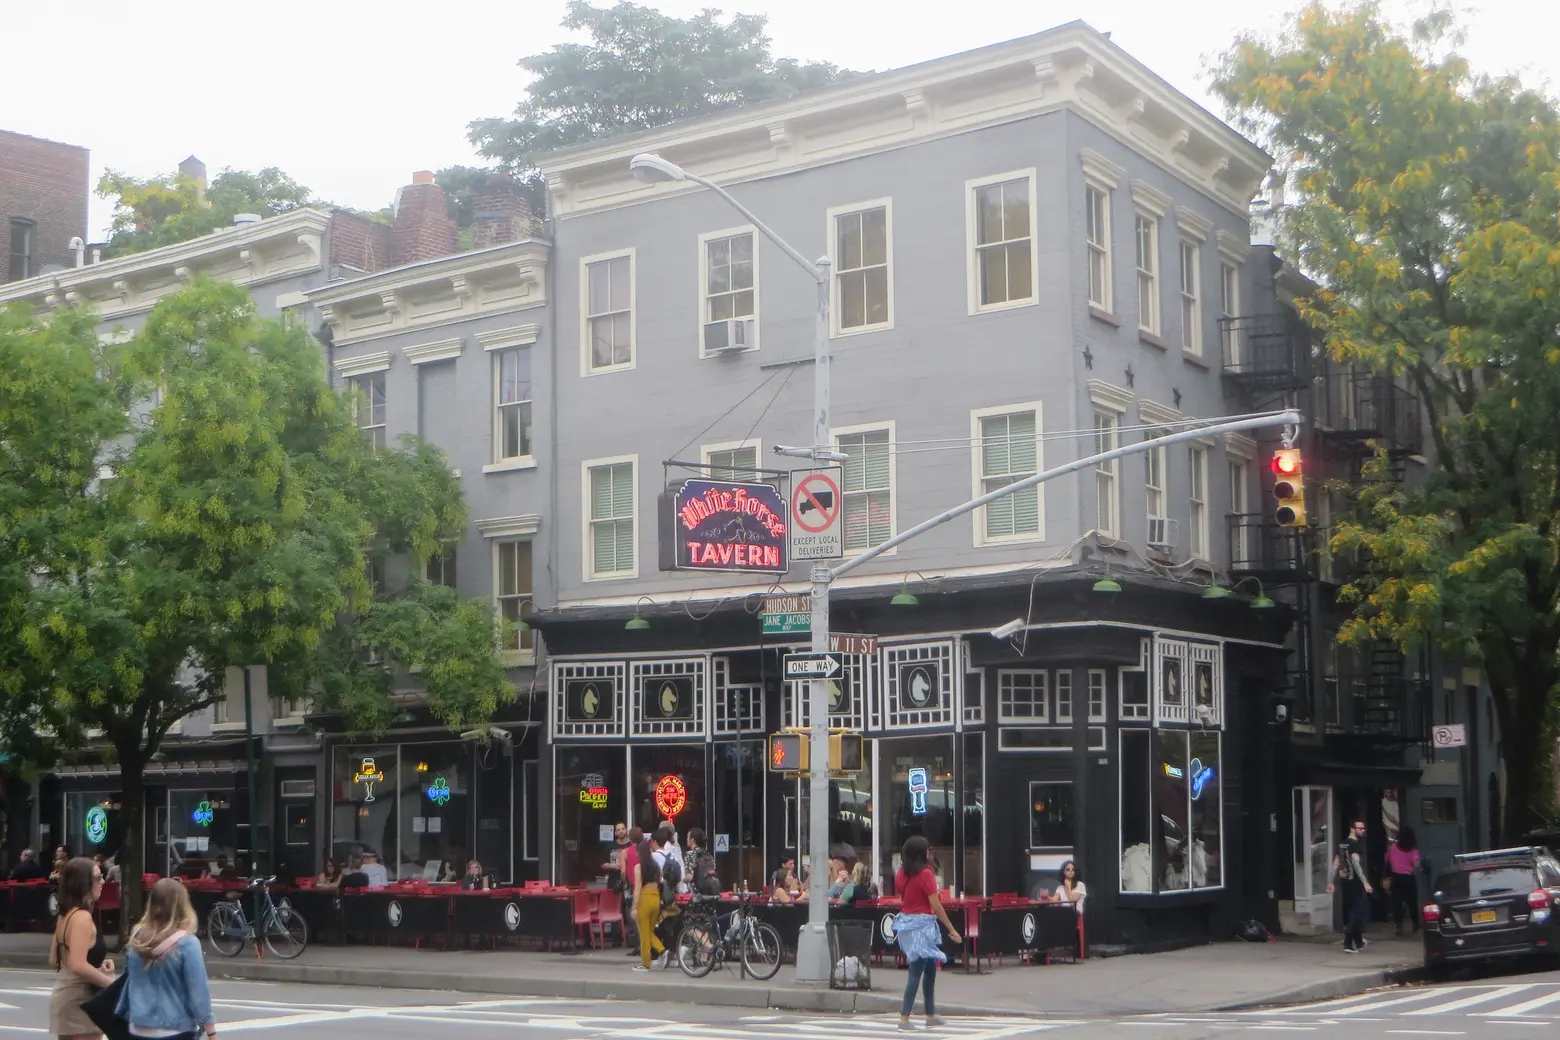 Historic Village icon White Horse Tavern is now closed for renovation under new ownership